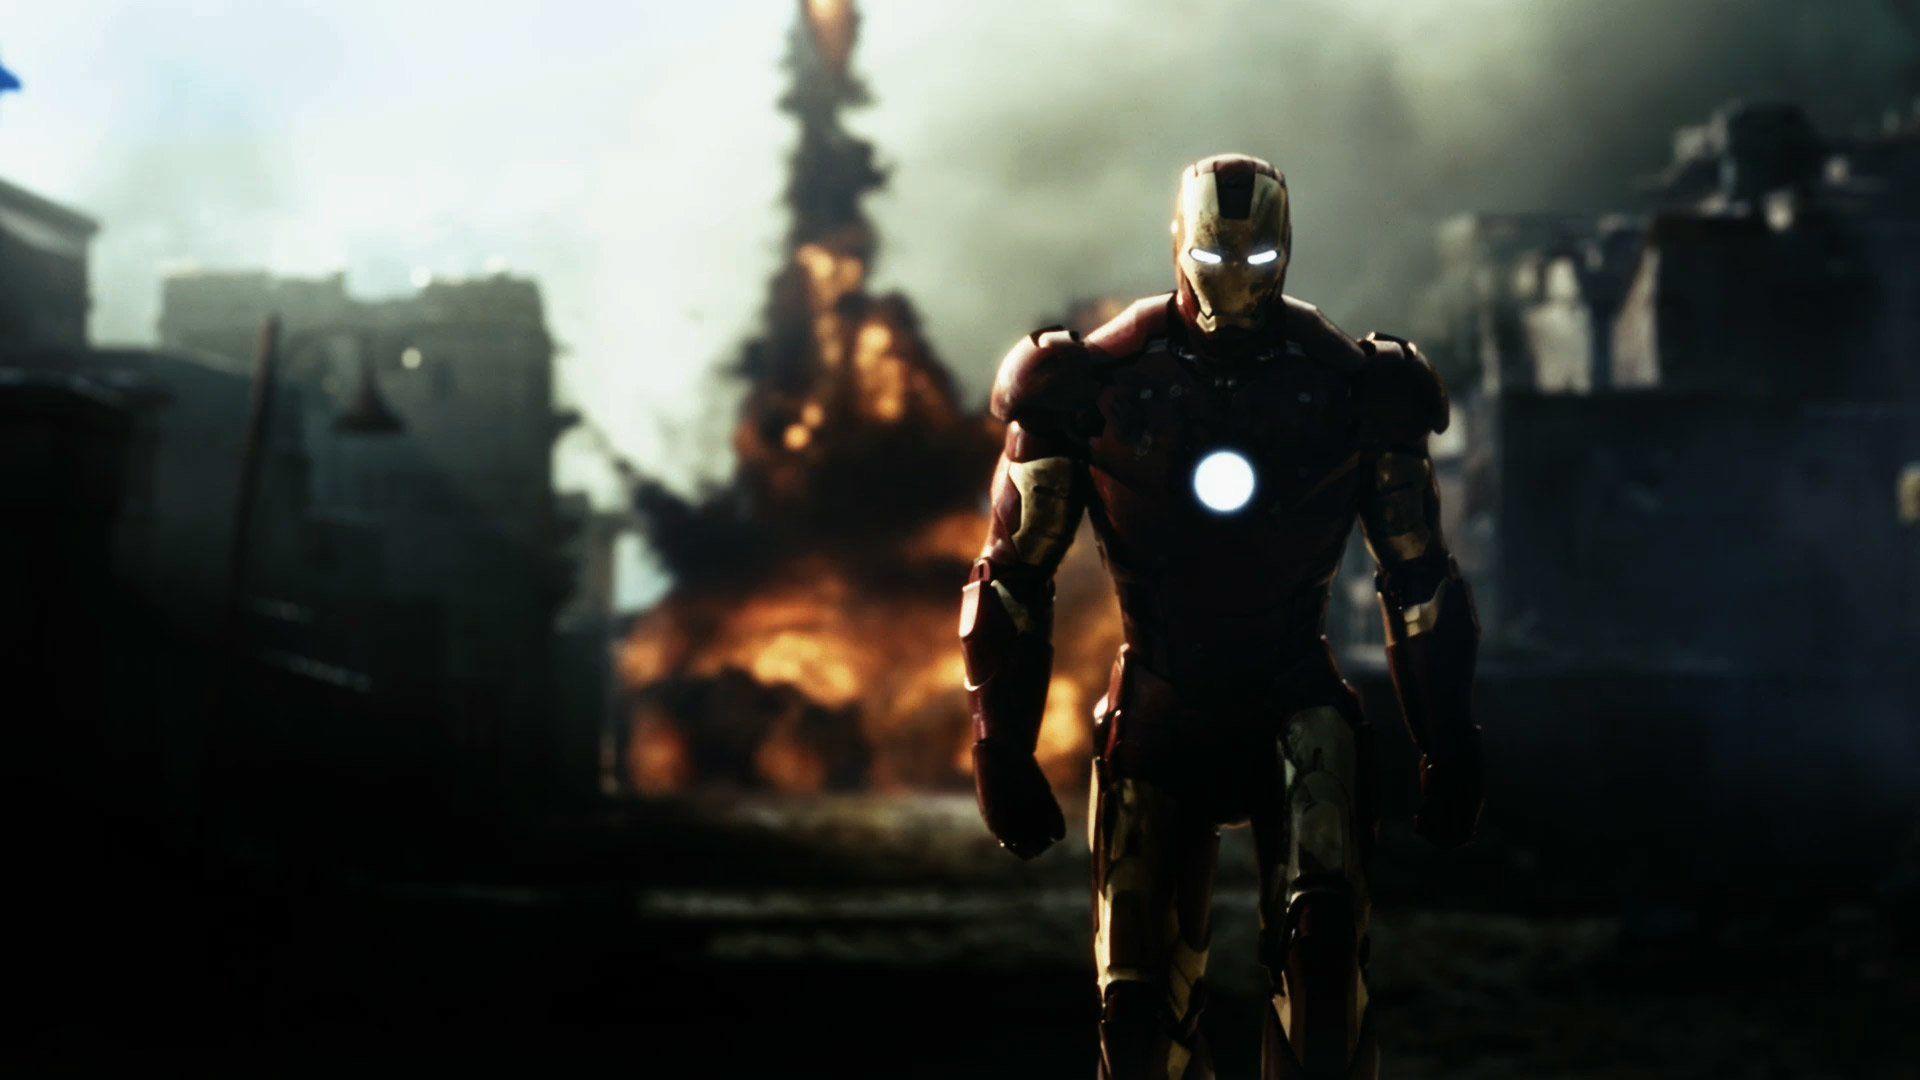 Iron Man Full HD Wallpaper and Background Imagex1080